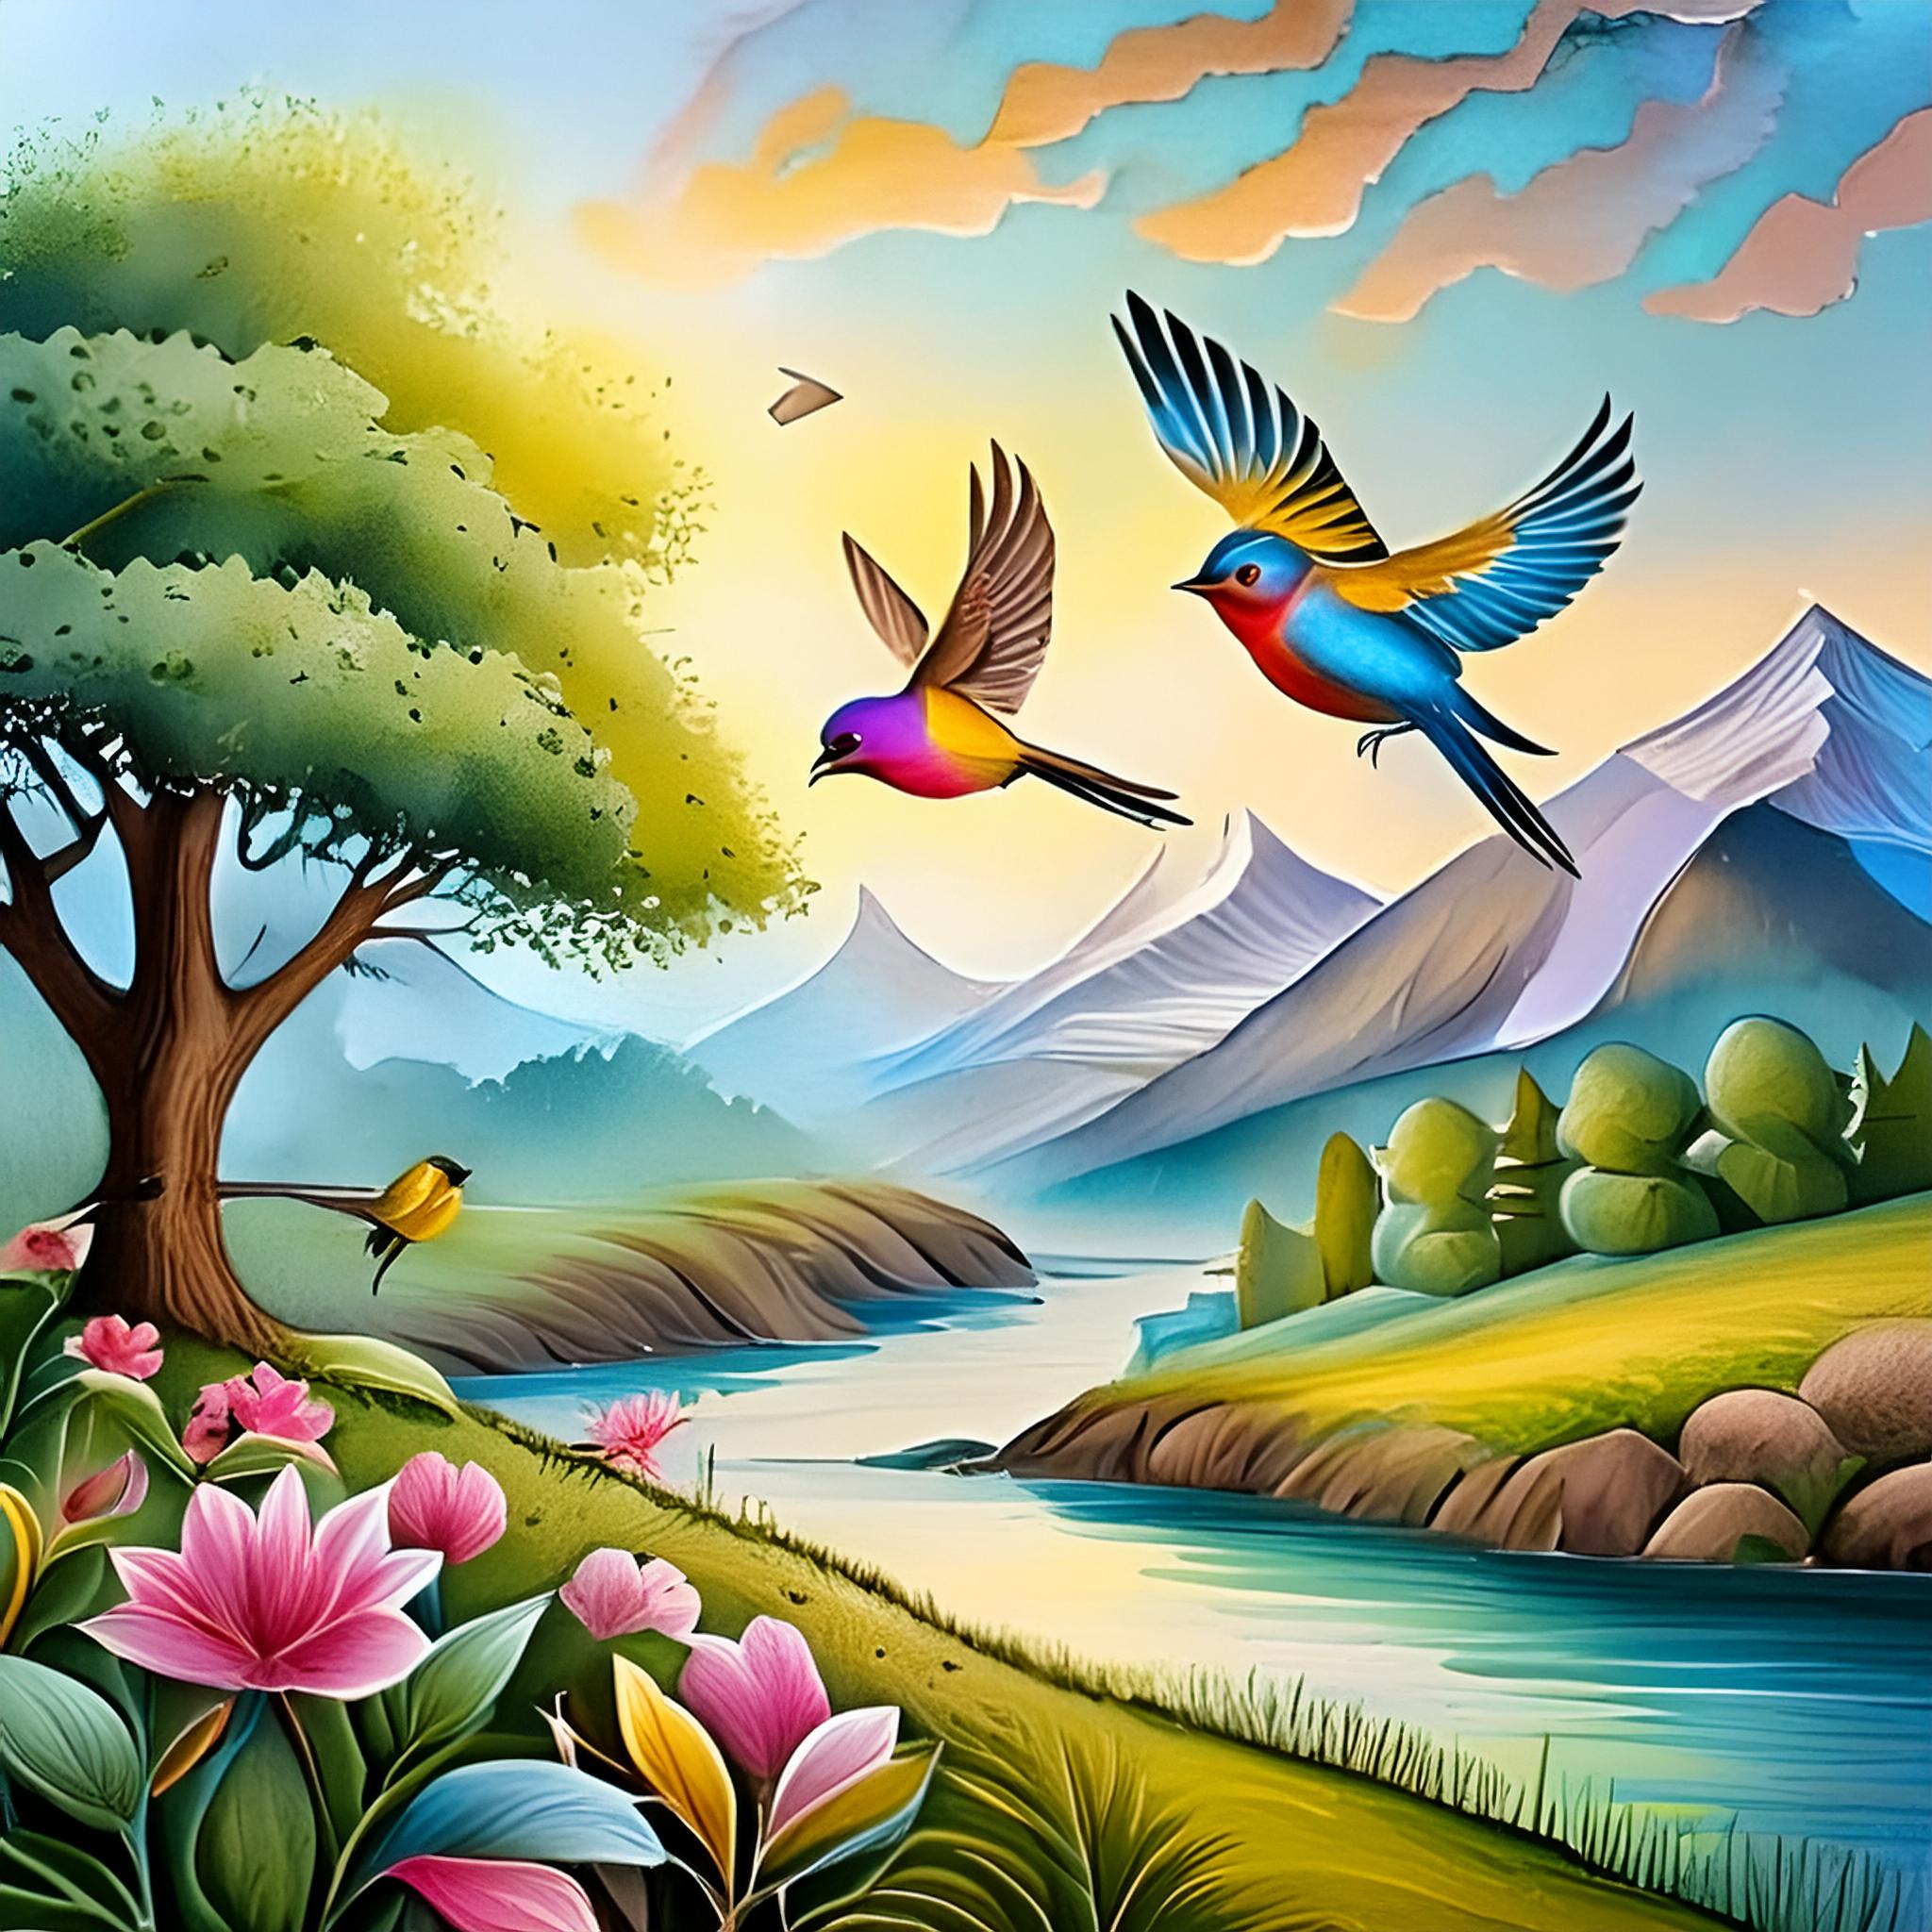 Firefly Beautiful colorful birds fly in the air above the beautiful landscape 38028.jpg